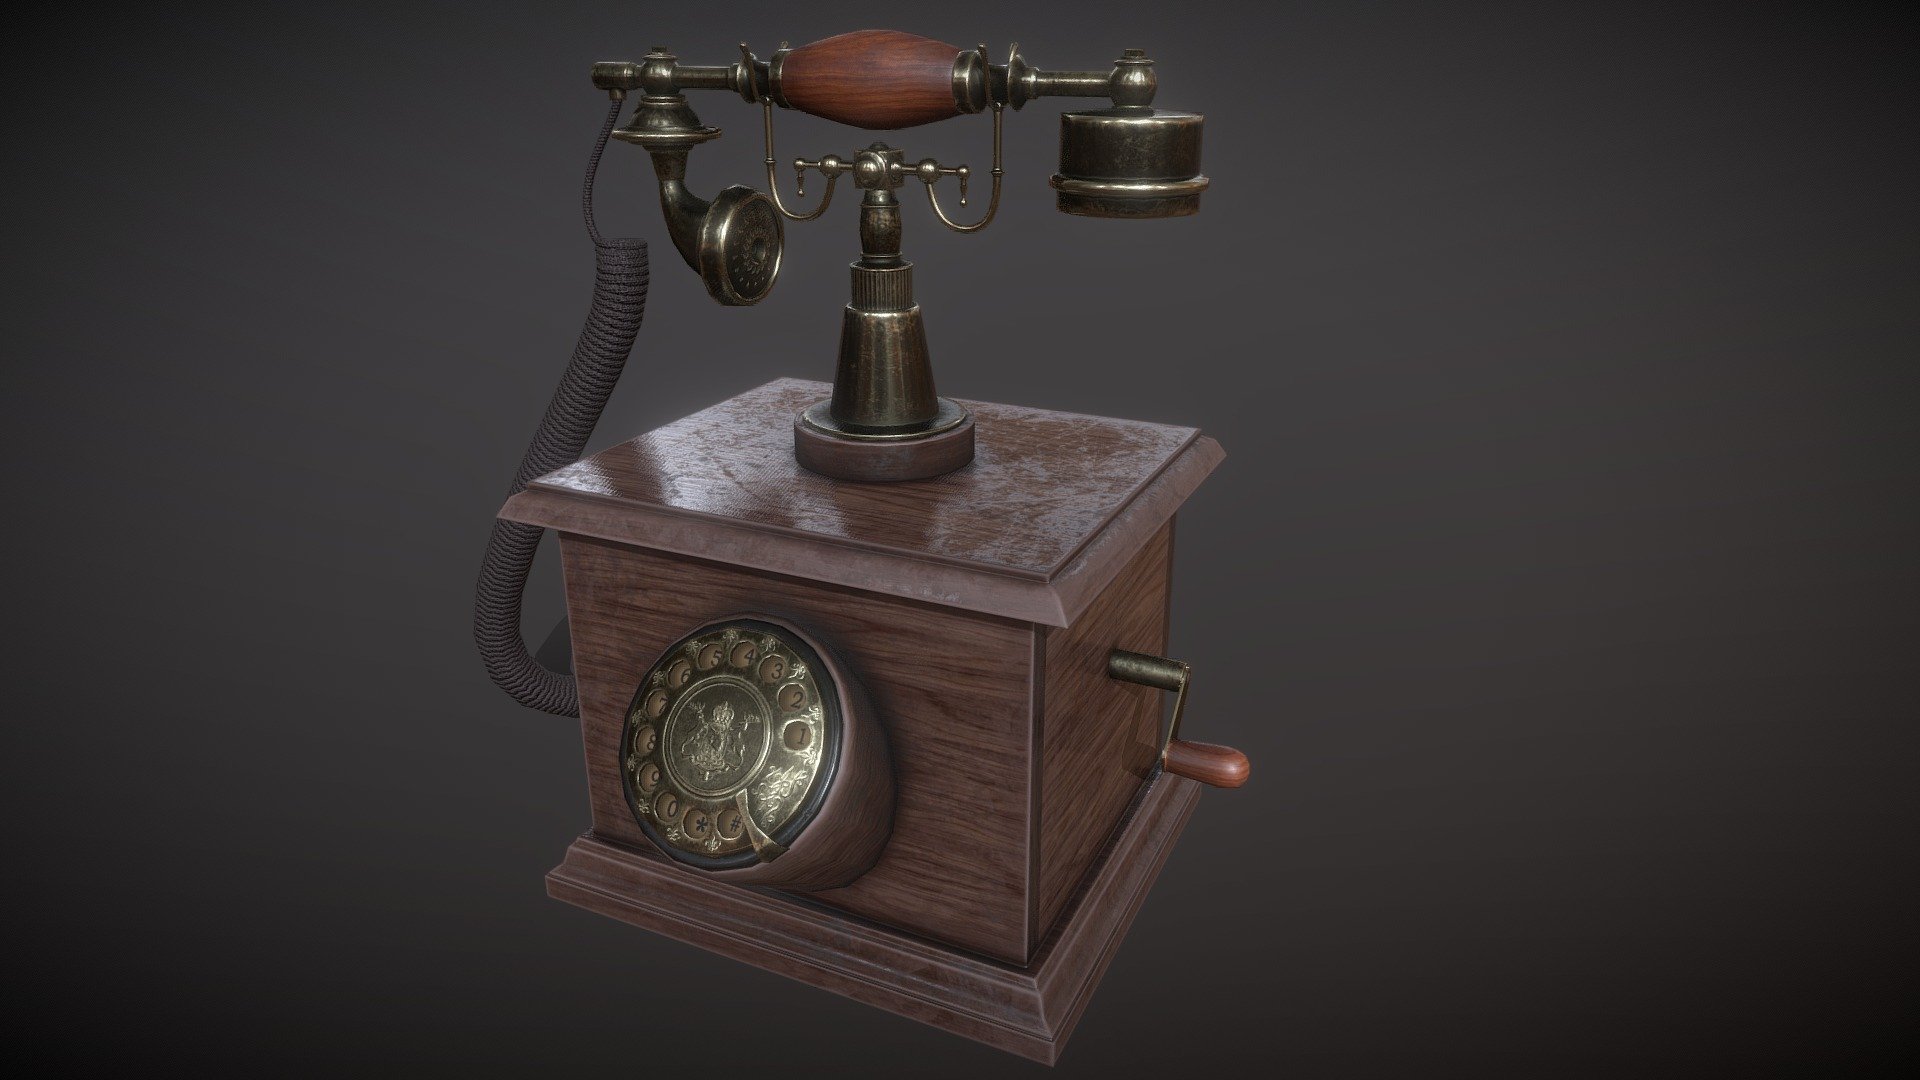 A vintage telephone that has been in use for quite some time.

Lowpoly
4k textures

used Software:
3DS Max
Substance 3D Painter - Vintage Telephone - 3D model by julius.jaeger 3d model